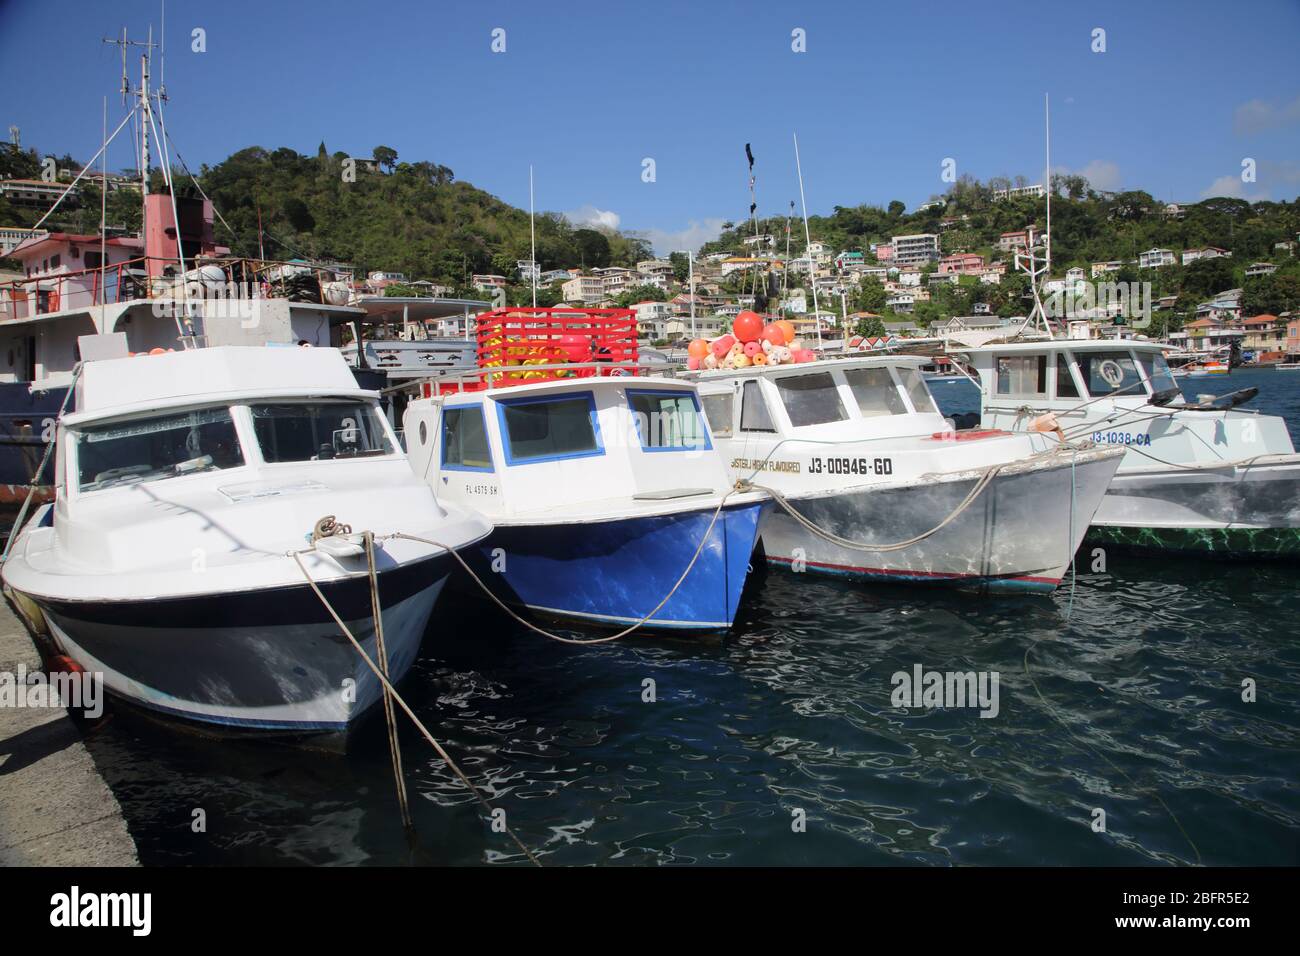 St George's Grenada Carenage Harbour Fishing Boats Stock Photo